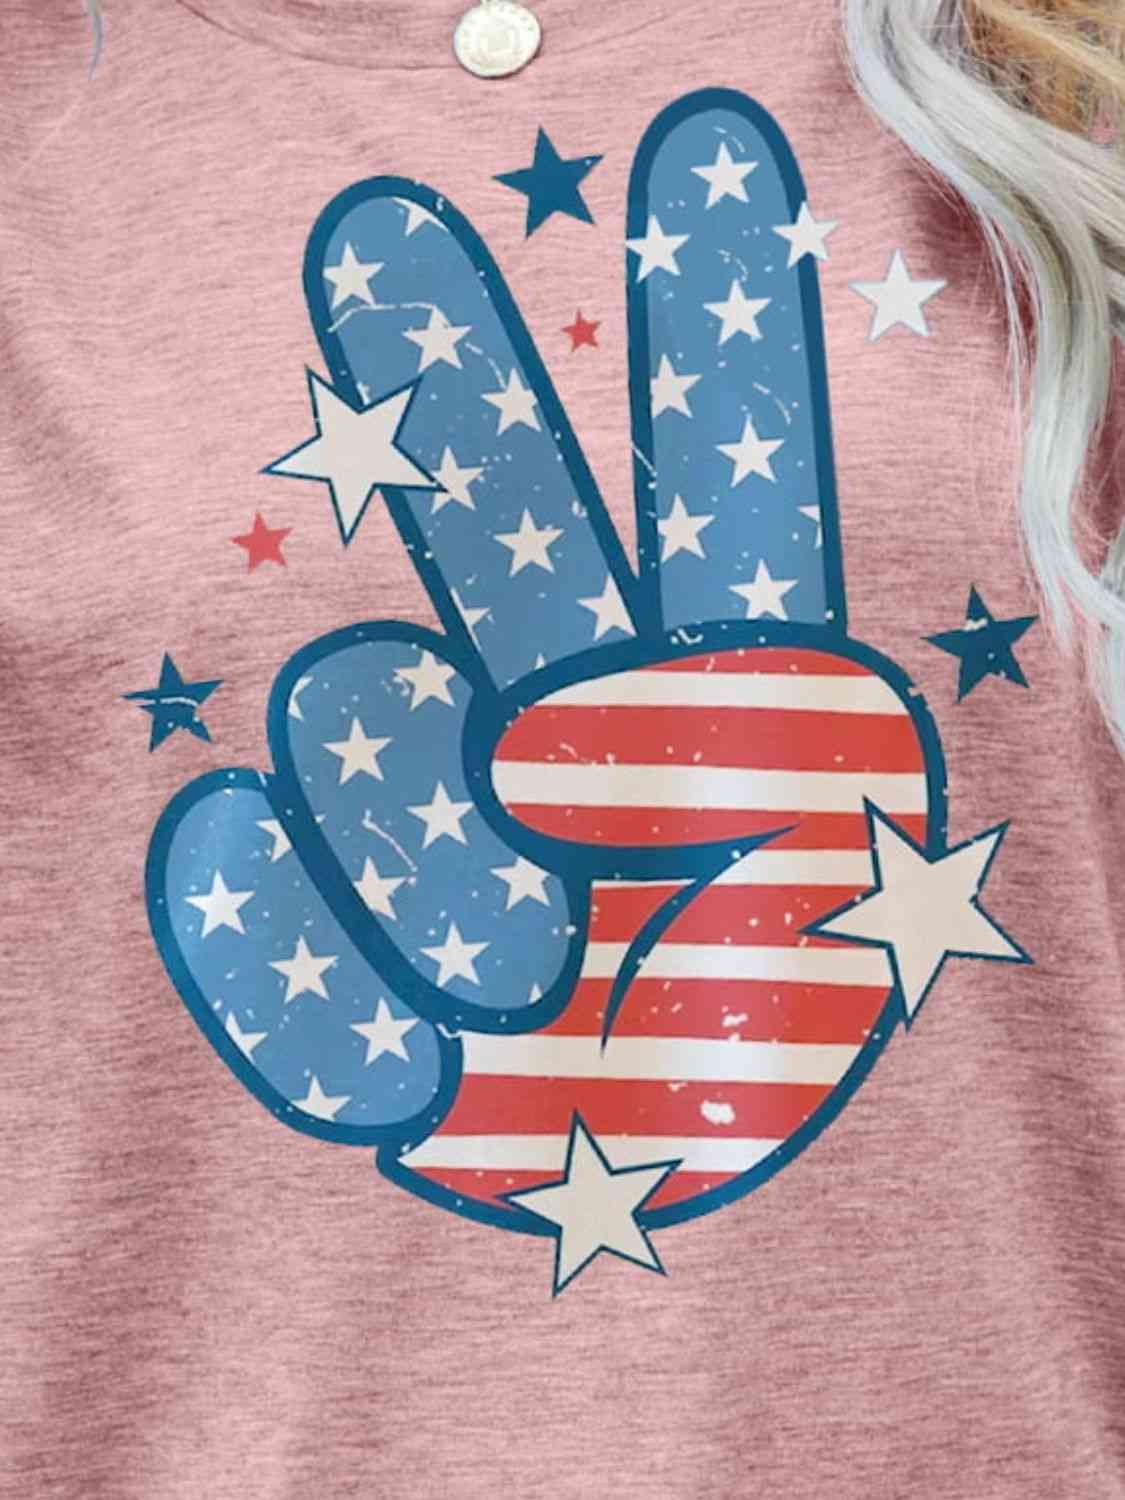 US Flag Peace Sign Hand Graphic Tee Print on any thing USA/STOD clothes